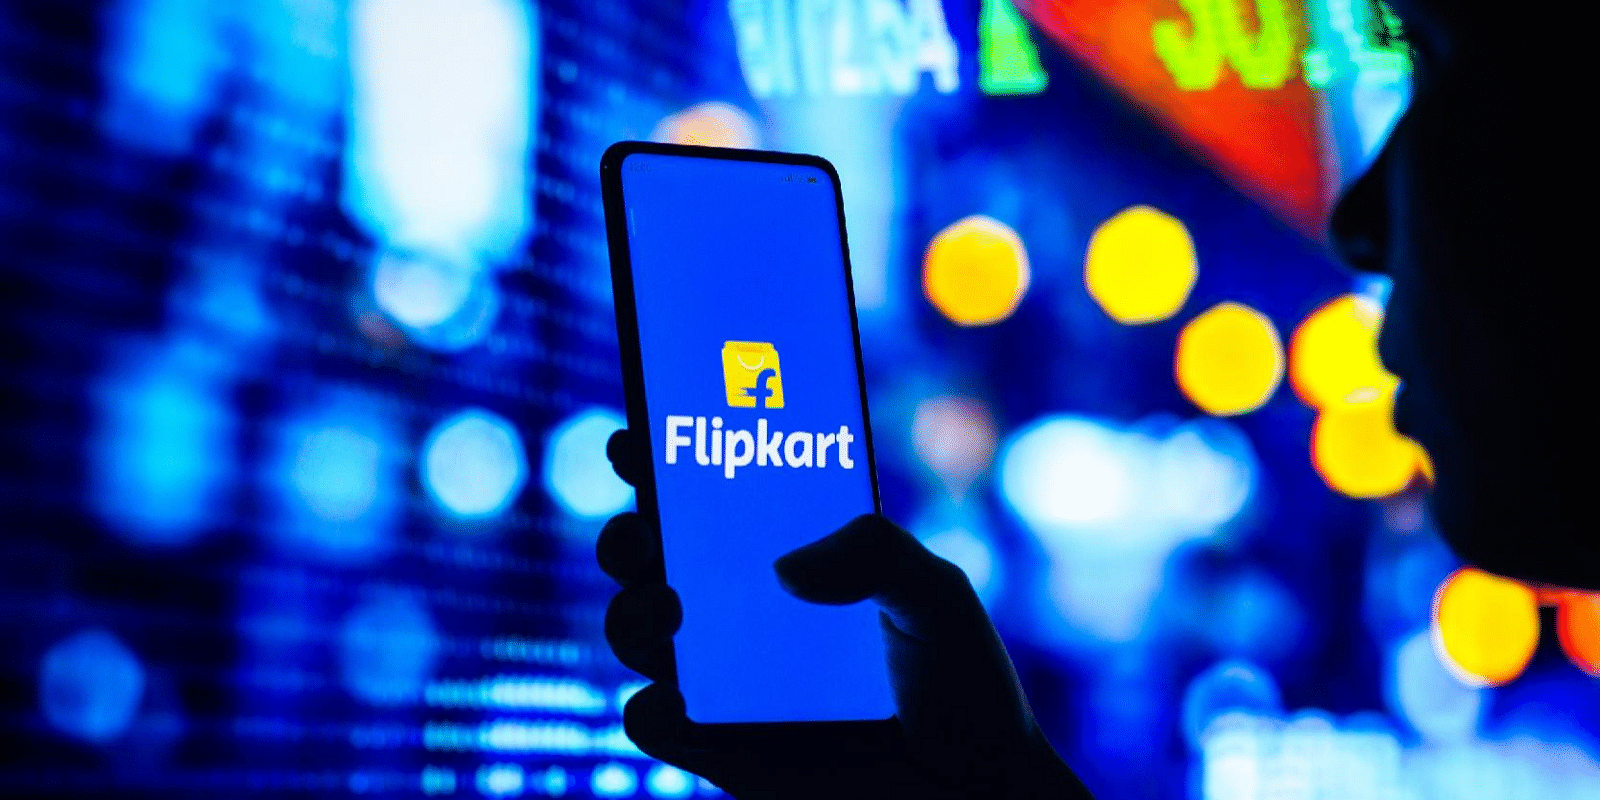 Flipkart launches new rate card policy to improve seller experience